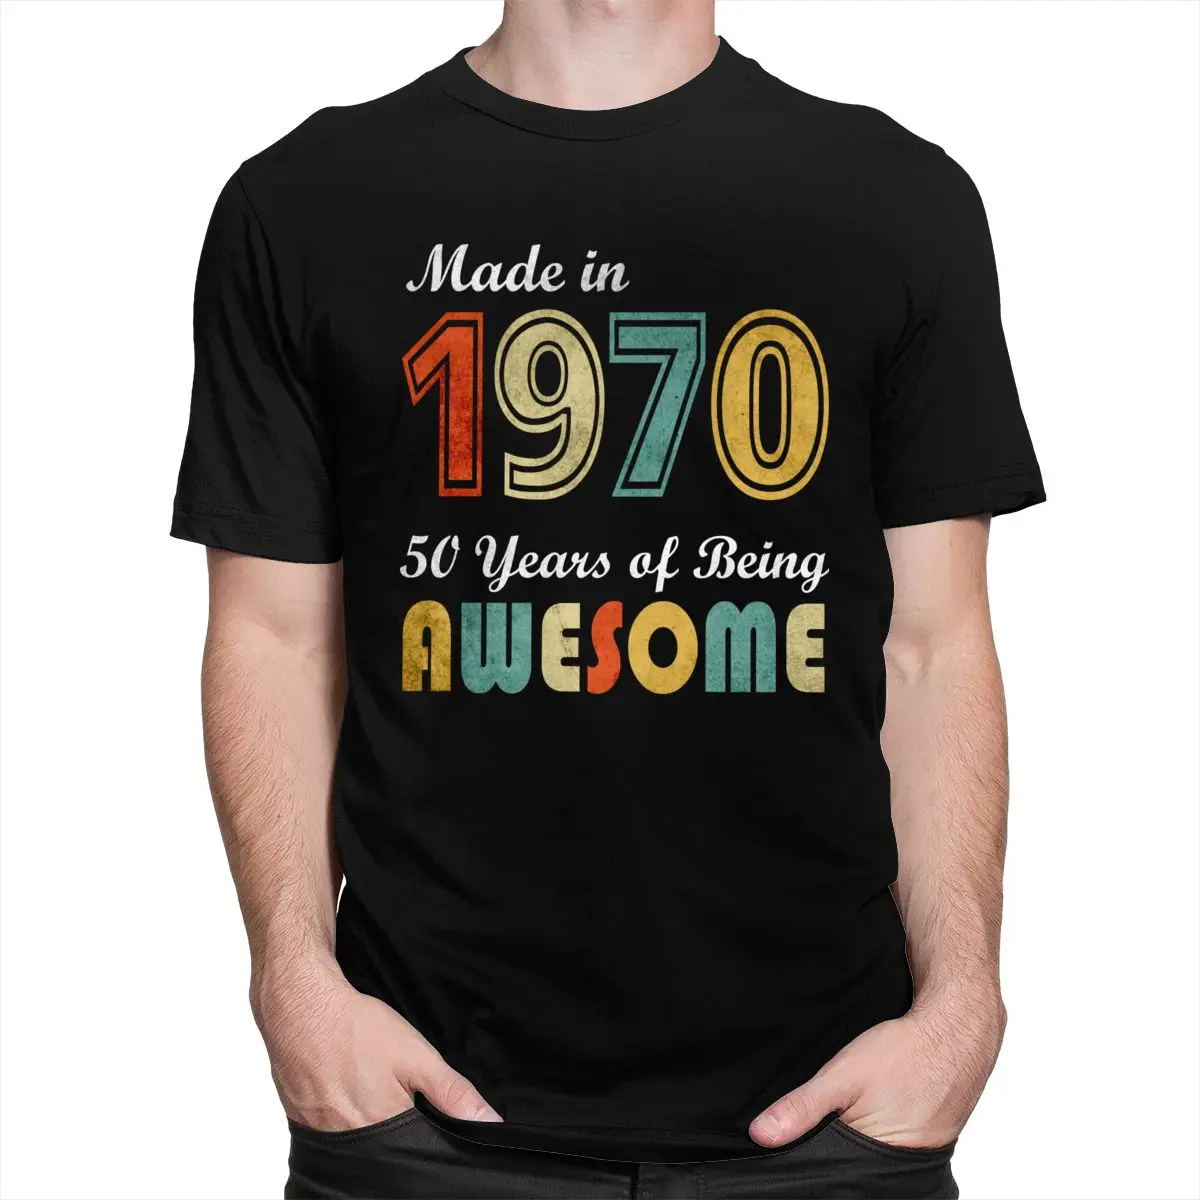 Made In 1970 Tee Shirt Homme Cotton 50 Years of Being Awesome Tops 50th Birthday Gift T-shirt Short Sleeved Tshirt Anniversary